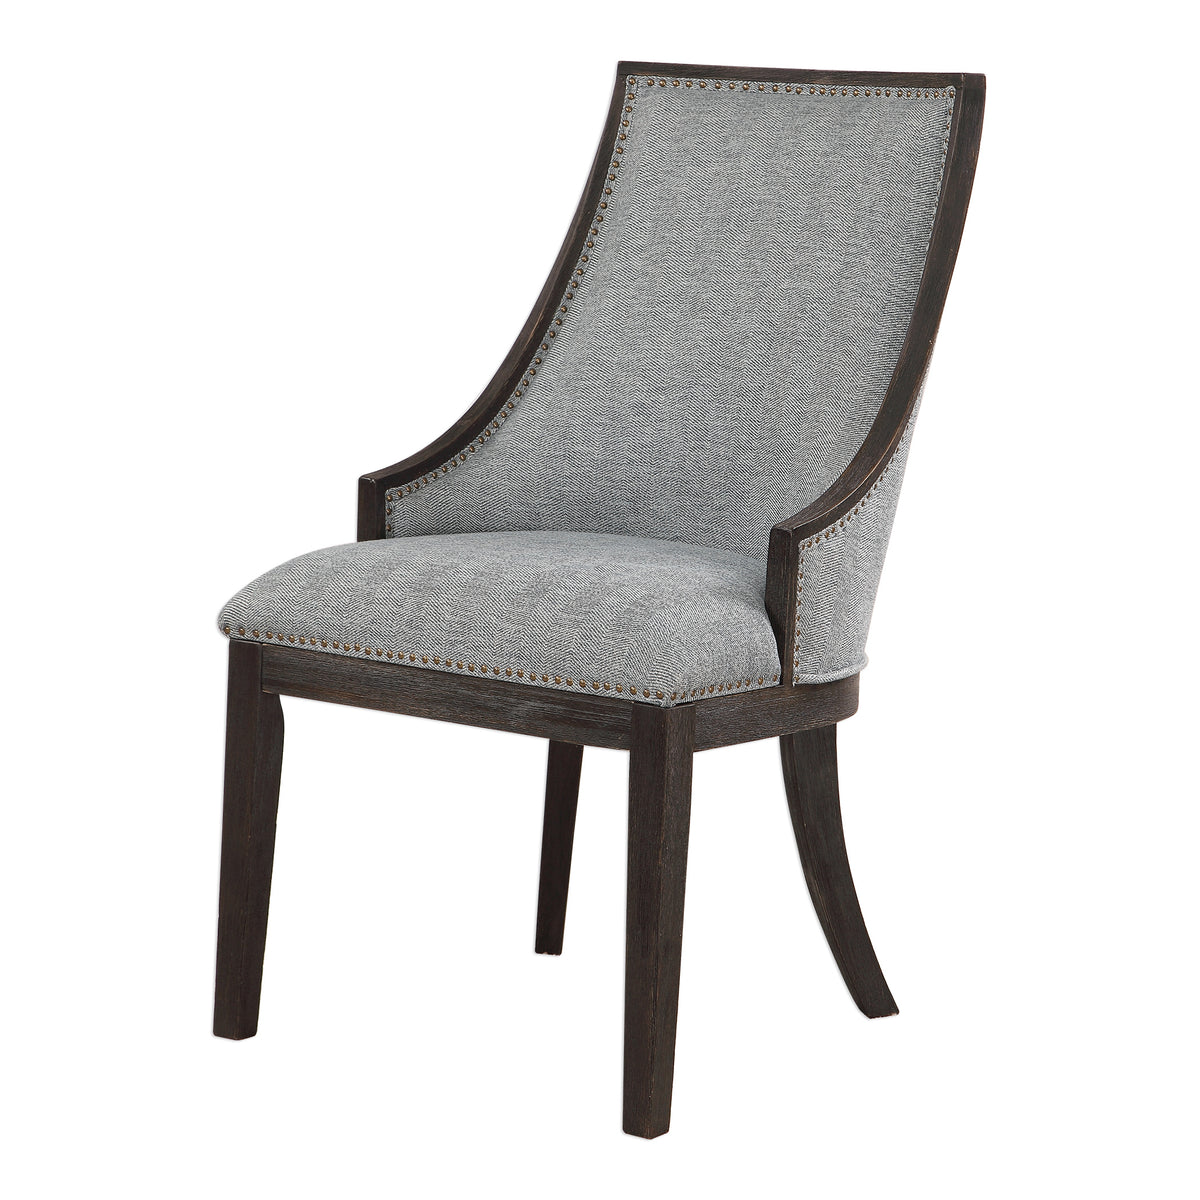 Uttermost Janis Ebony Accent Chair